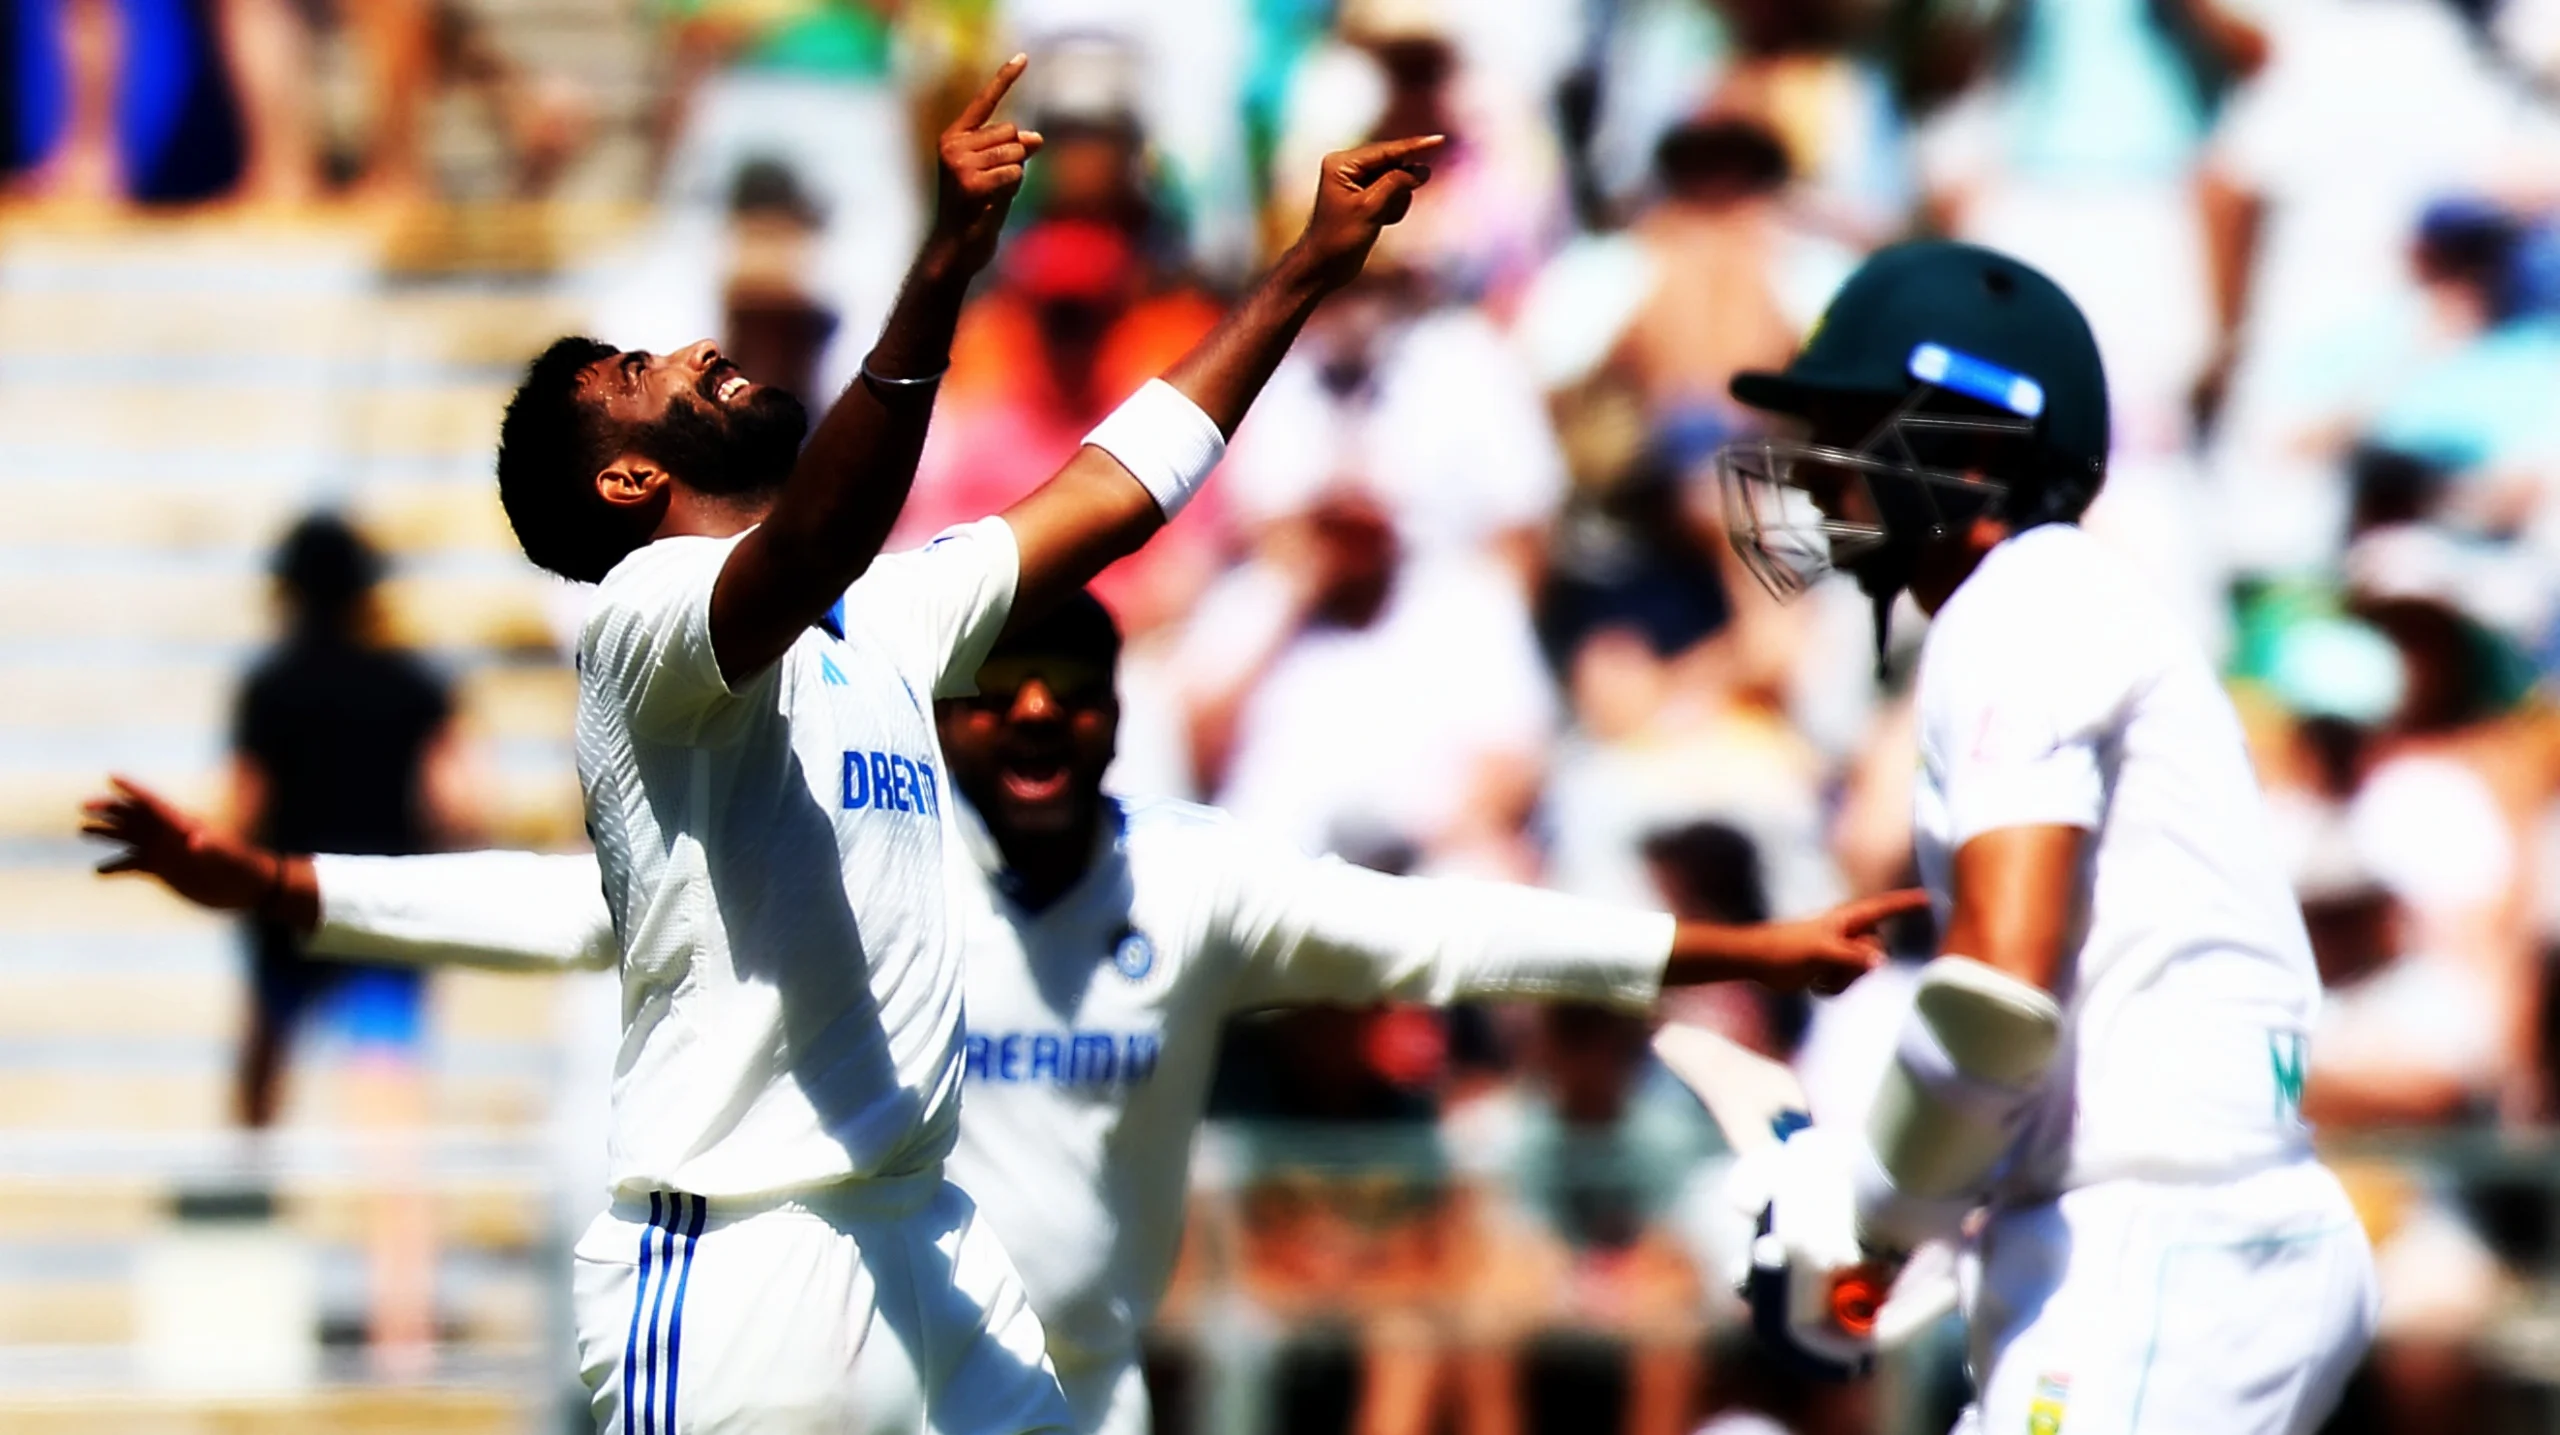 India won the second test aginst england